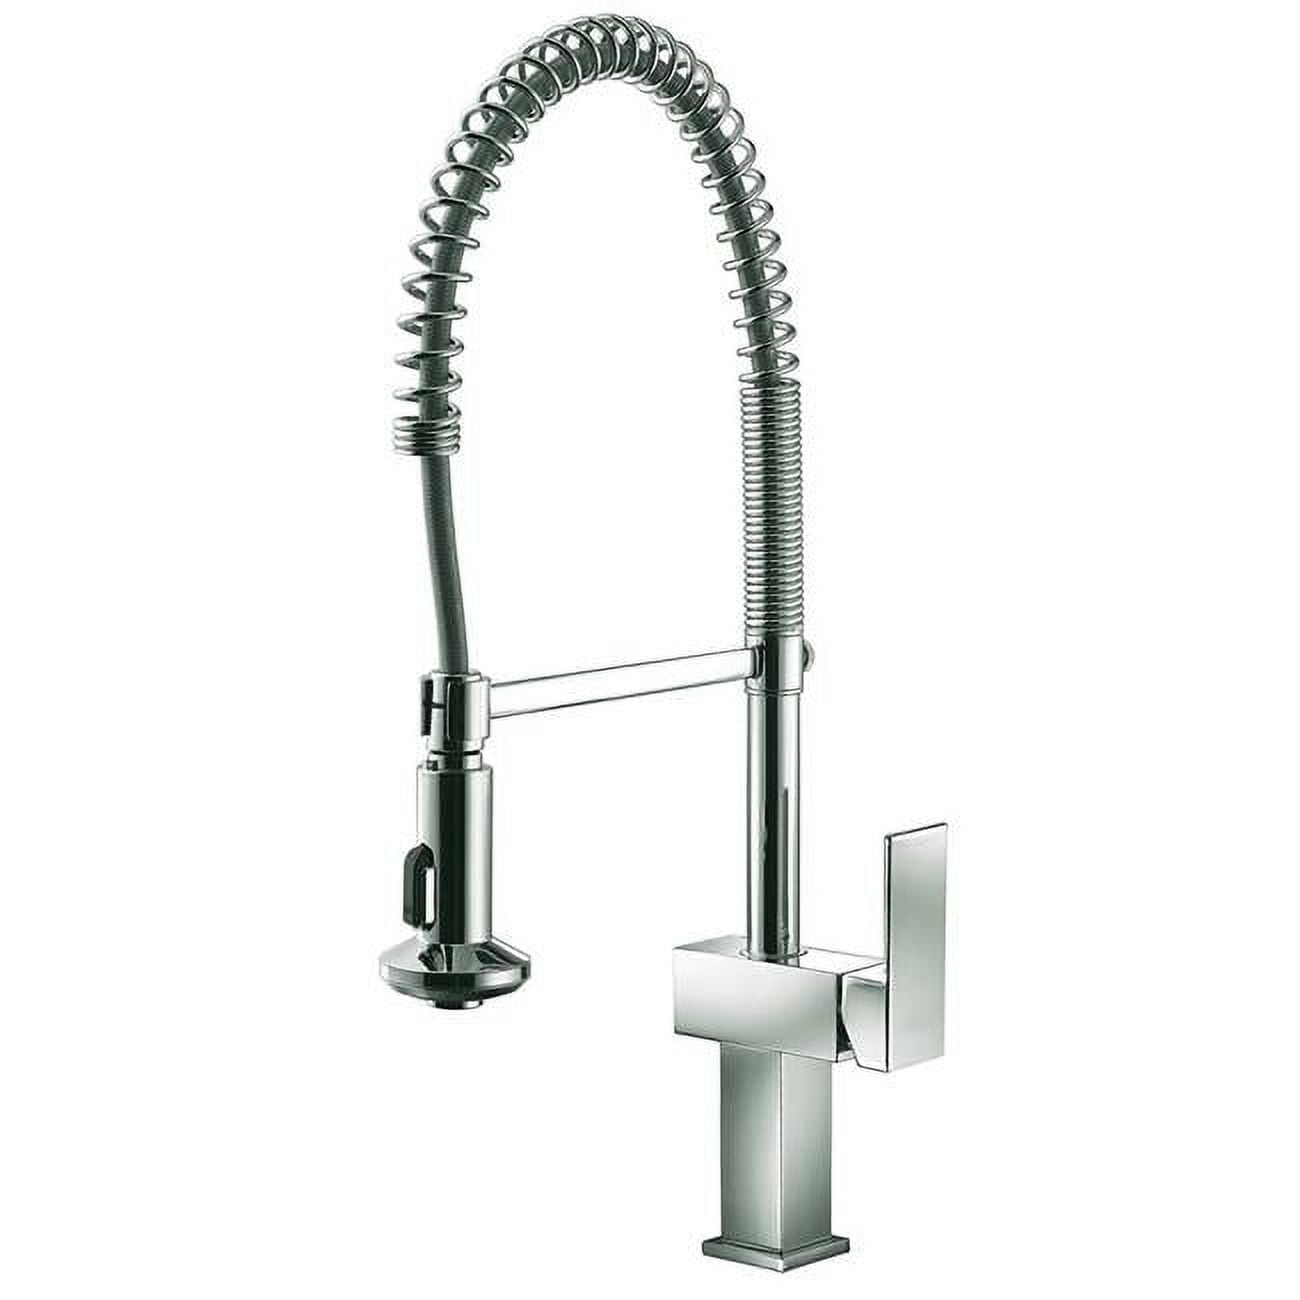 Single-lever Pull-down Kitchen Faucet, Brushed Nickel